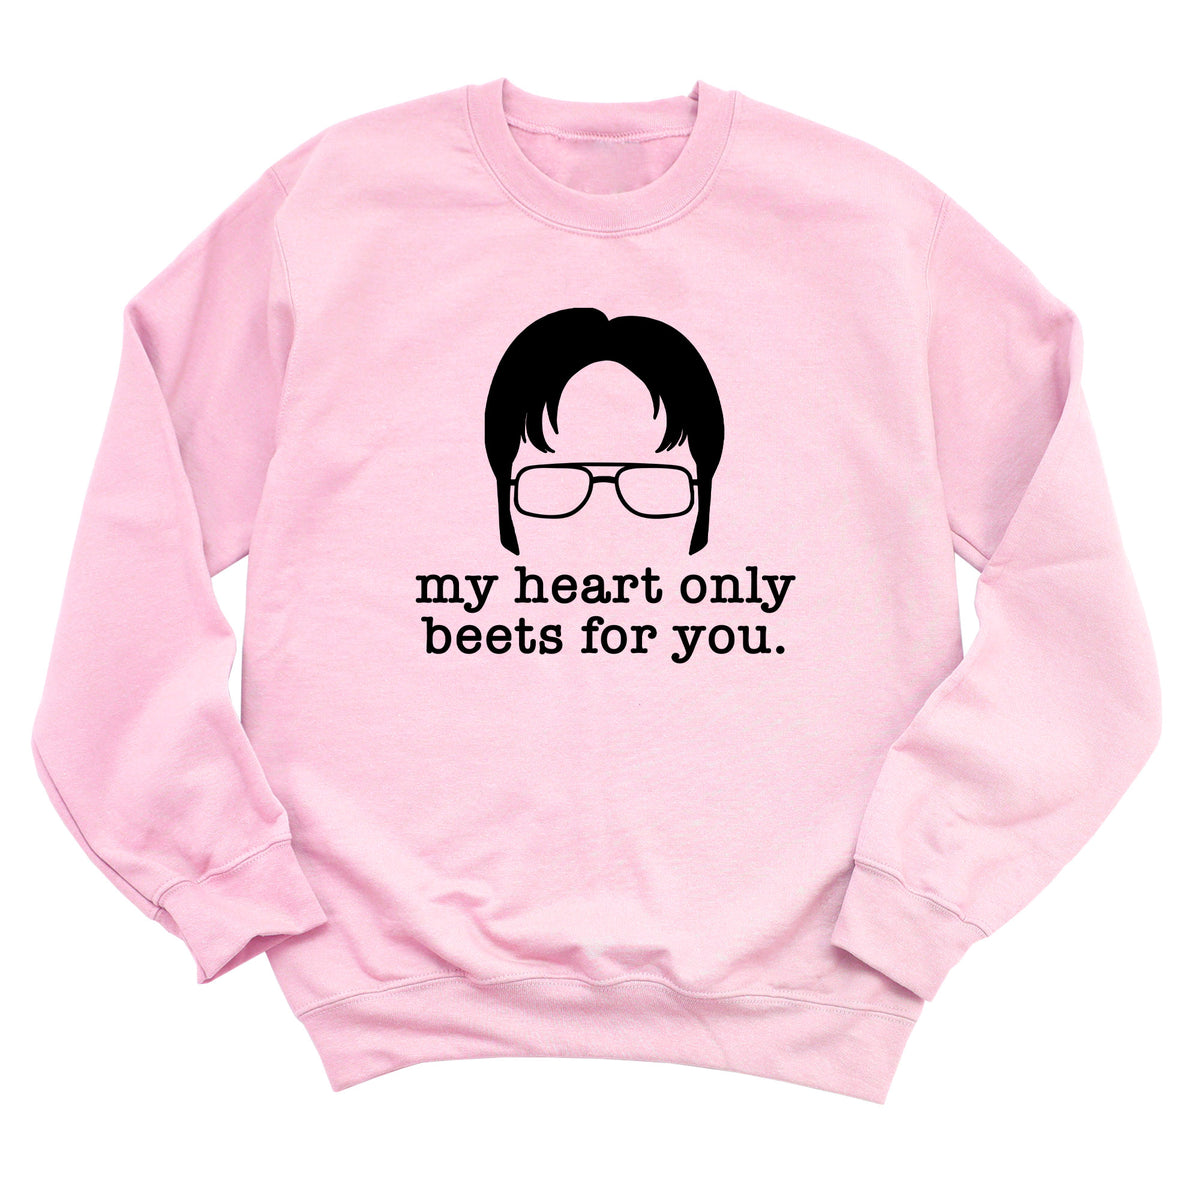 My Heart Only Beets for You Sweatshirt